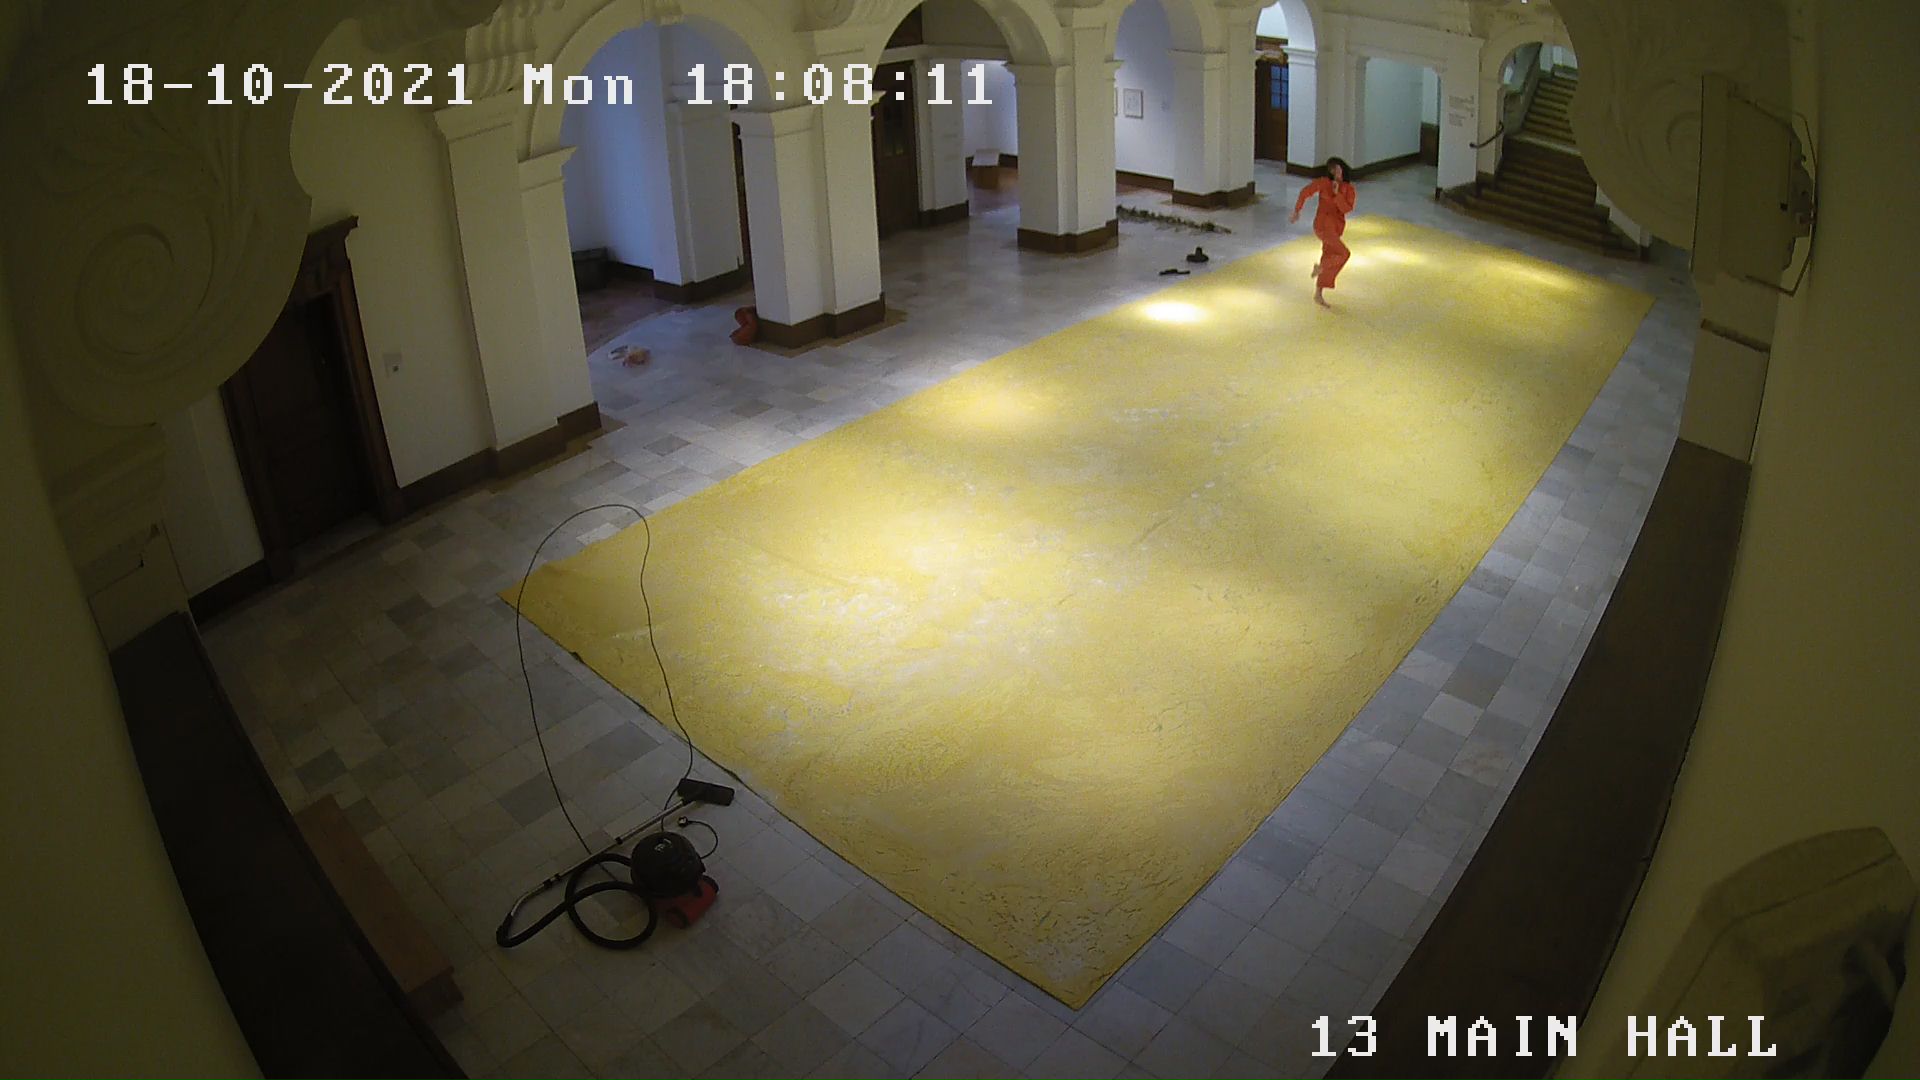 CCTV footage of performance at Glynn Vivian Gallery in Swansea. The image shows a figure dancing in an orange outfit on a yellow floor. 